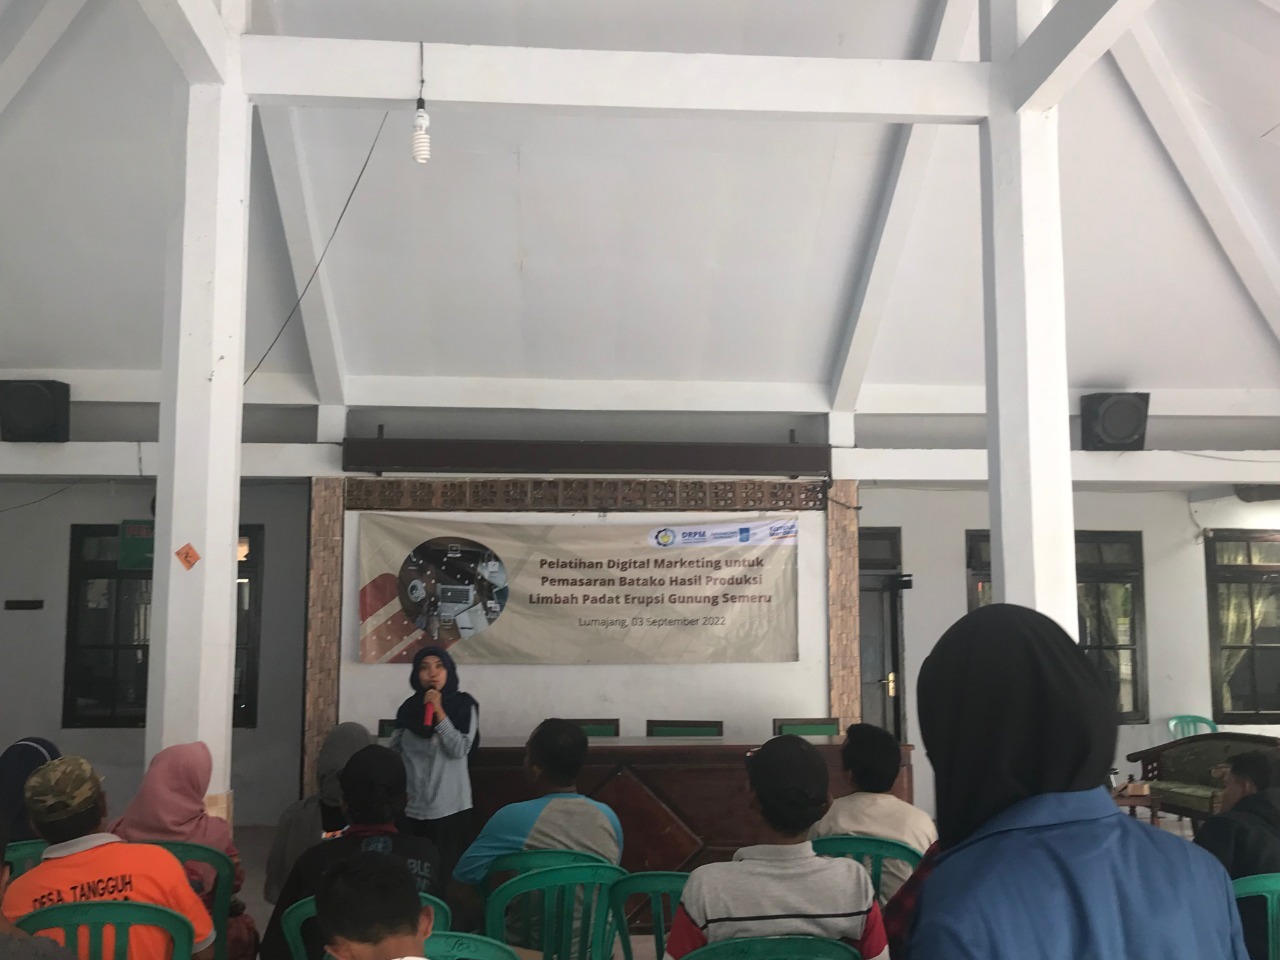 Rosyida Rahmah SE when presenting material about digital marketing in front of residents at the Sumberwuluh Village Hall, Lumajang as part of the activities of the ITS KKN Abmas team